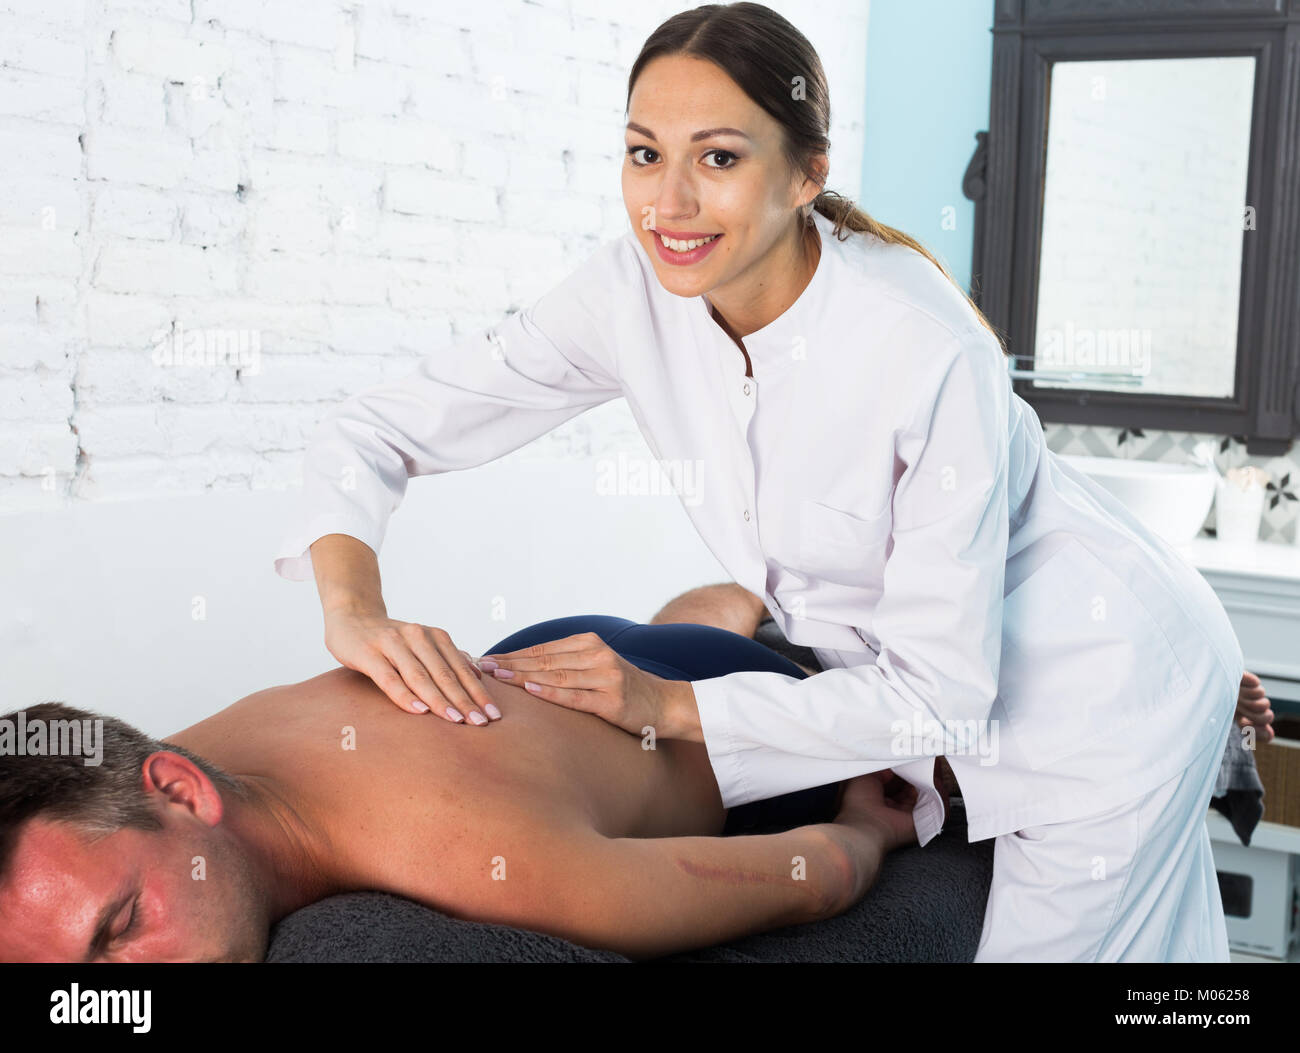 George does a professional massage to a sexy brunette